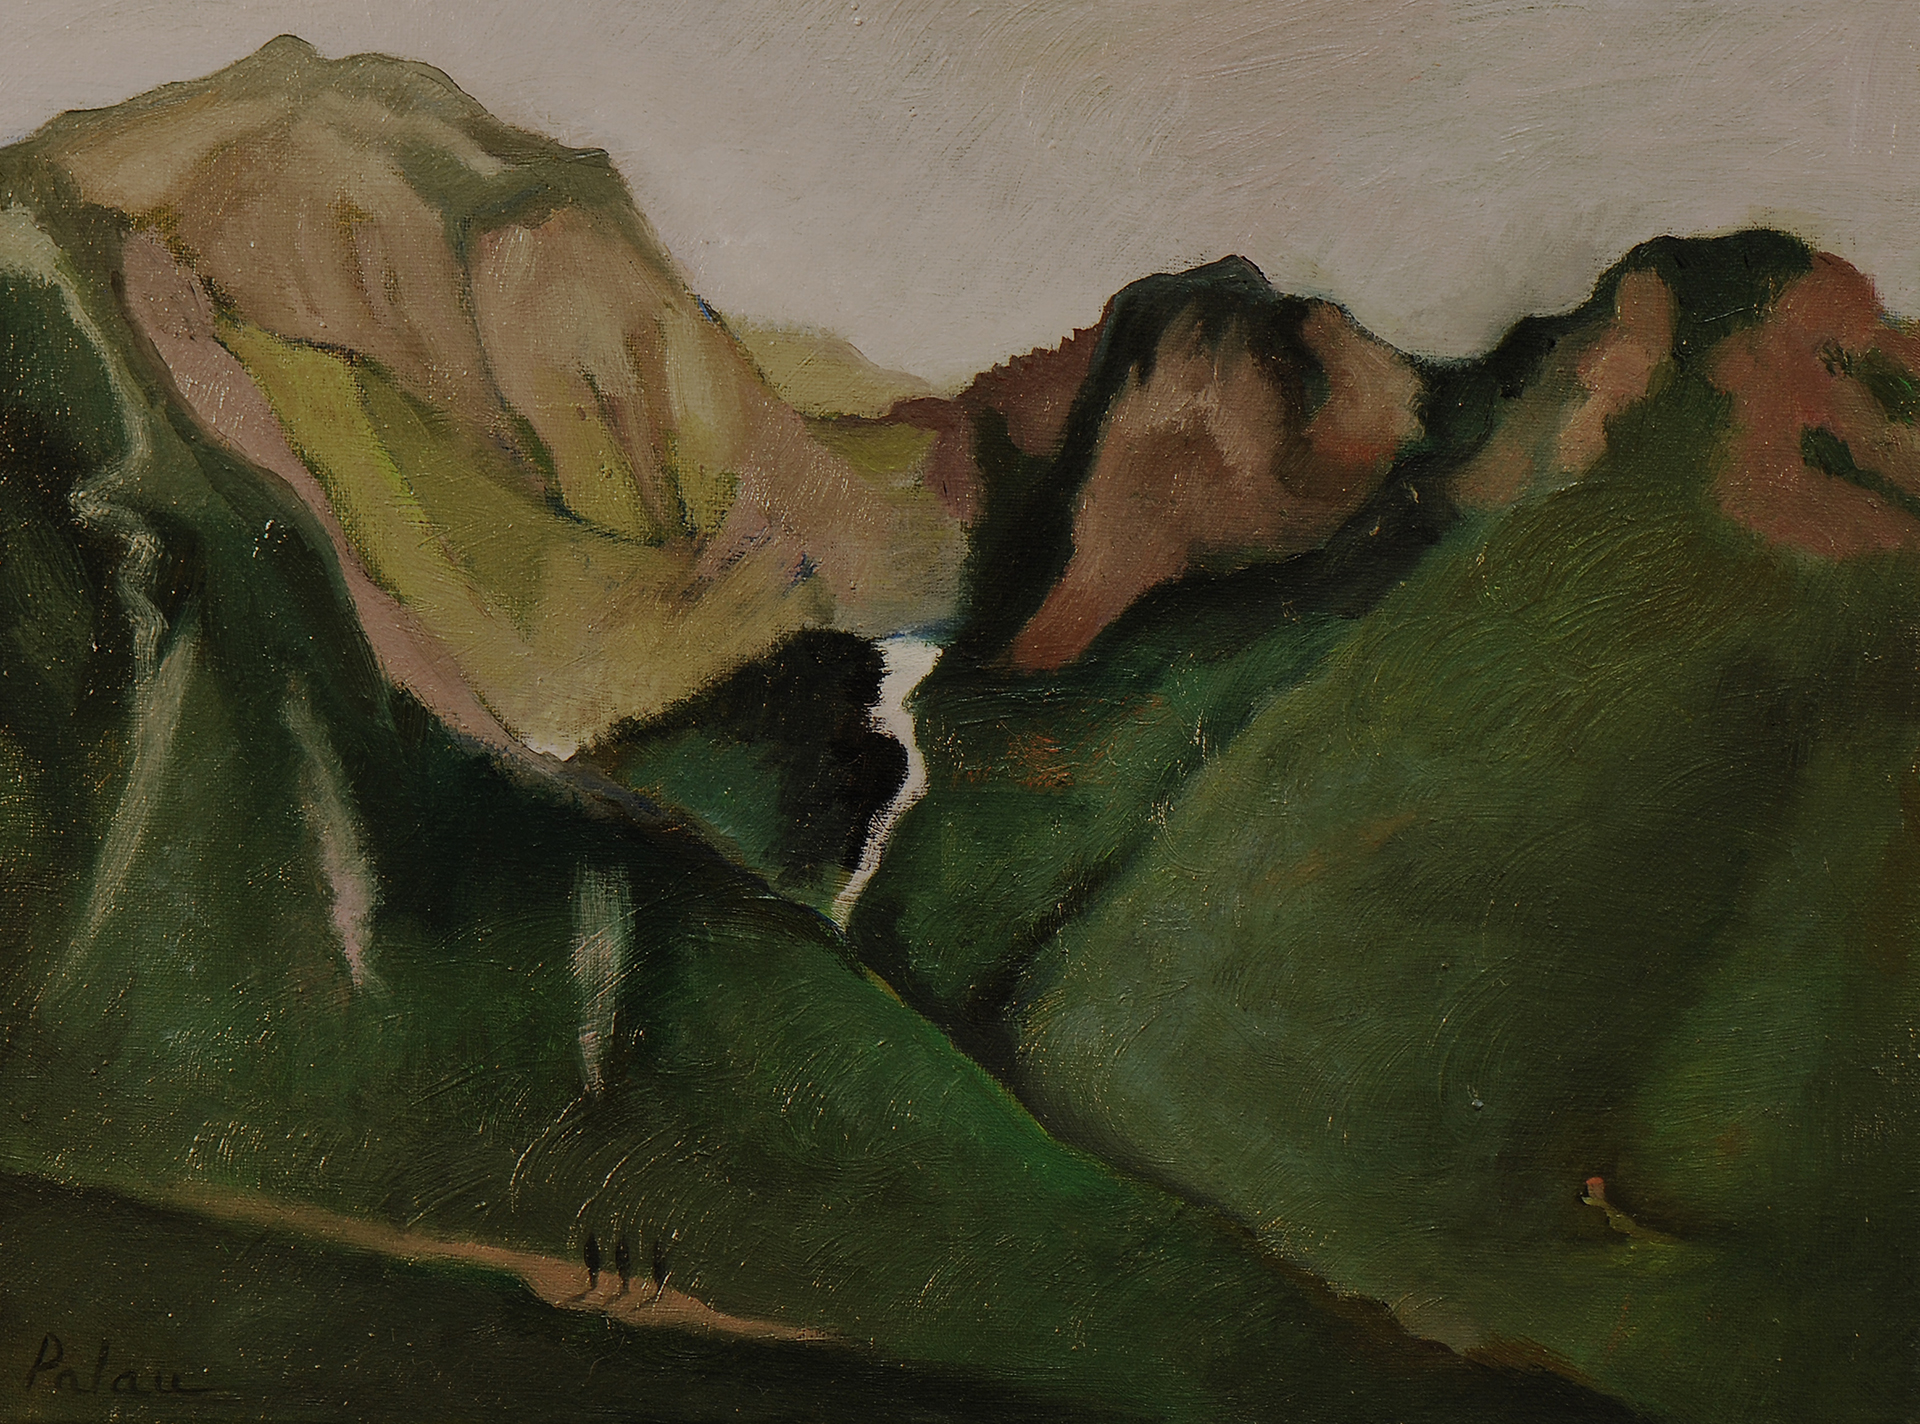 Quarries in Northern Tuscany, Fleur Palau - oil on canvas, 6 x 8